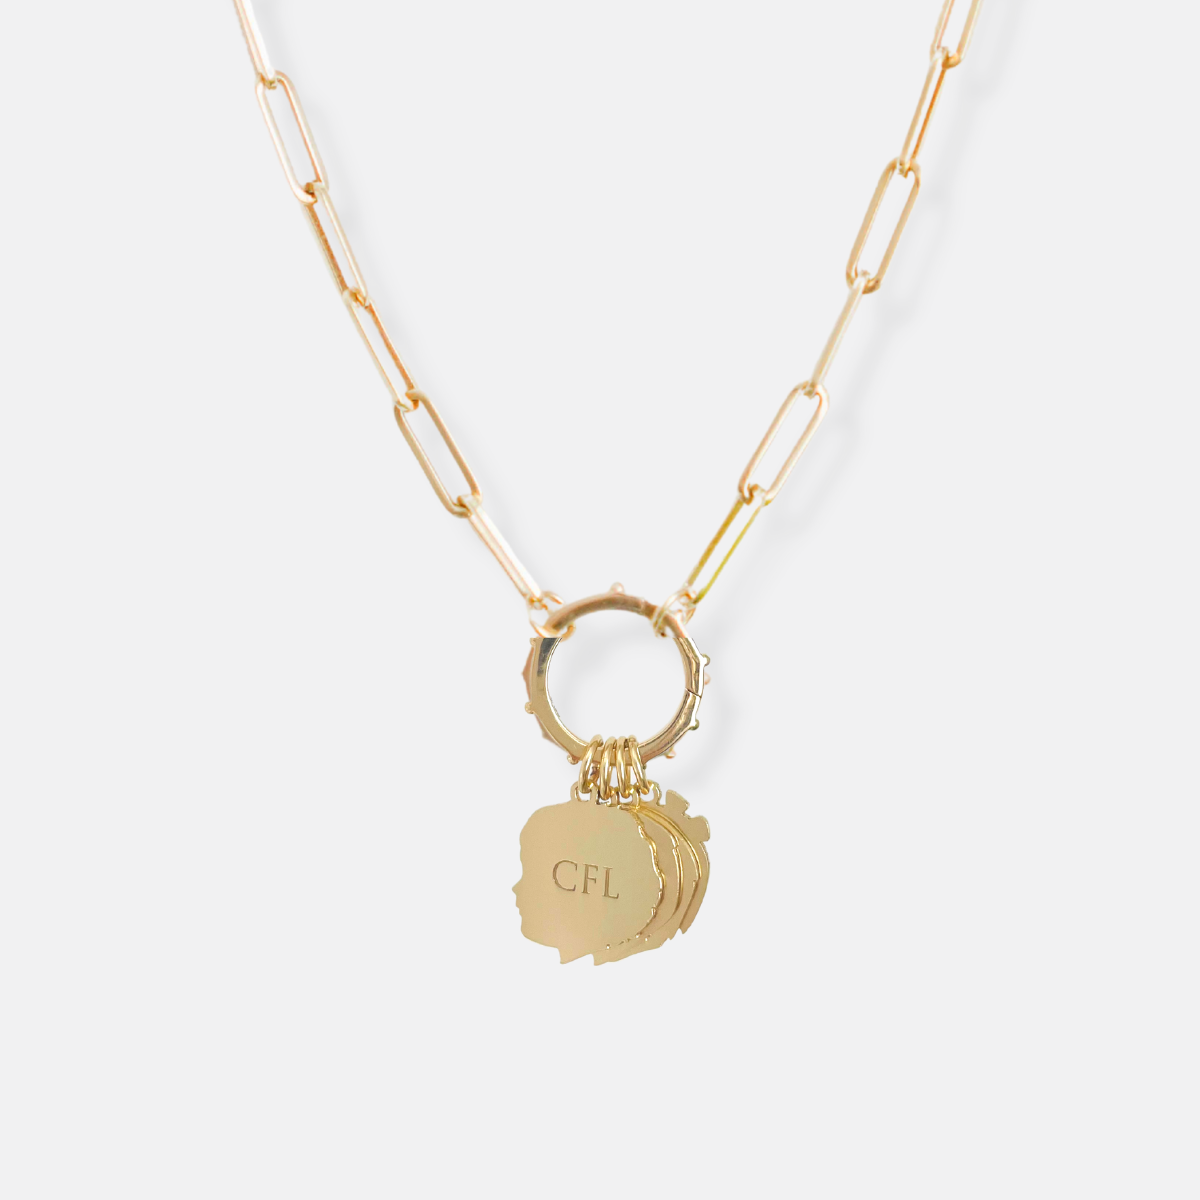 Personalized Silhouette Necklaces & 14k Gold Silhouette Jewelry